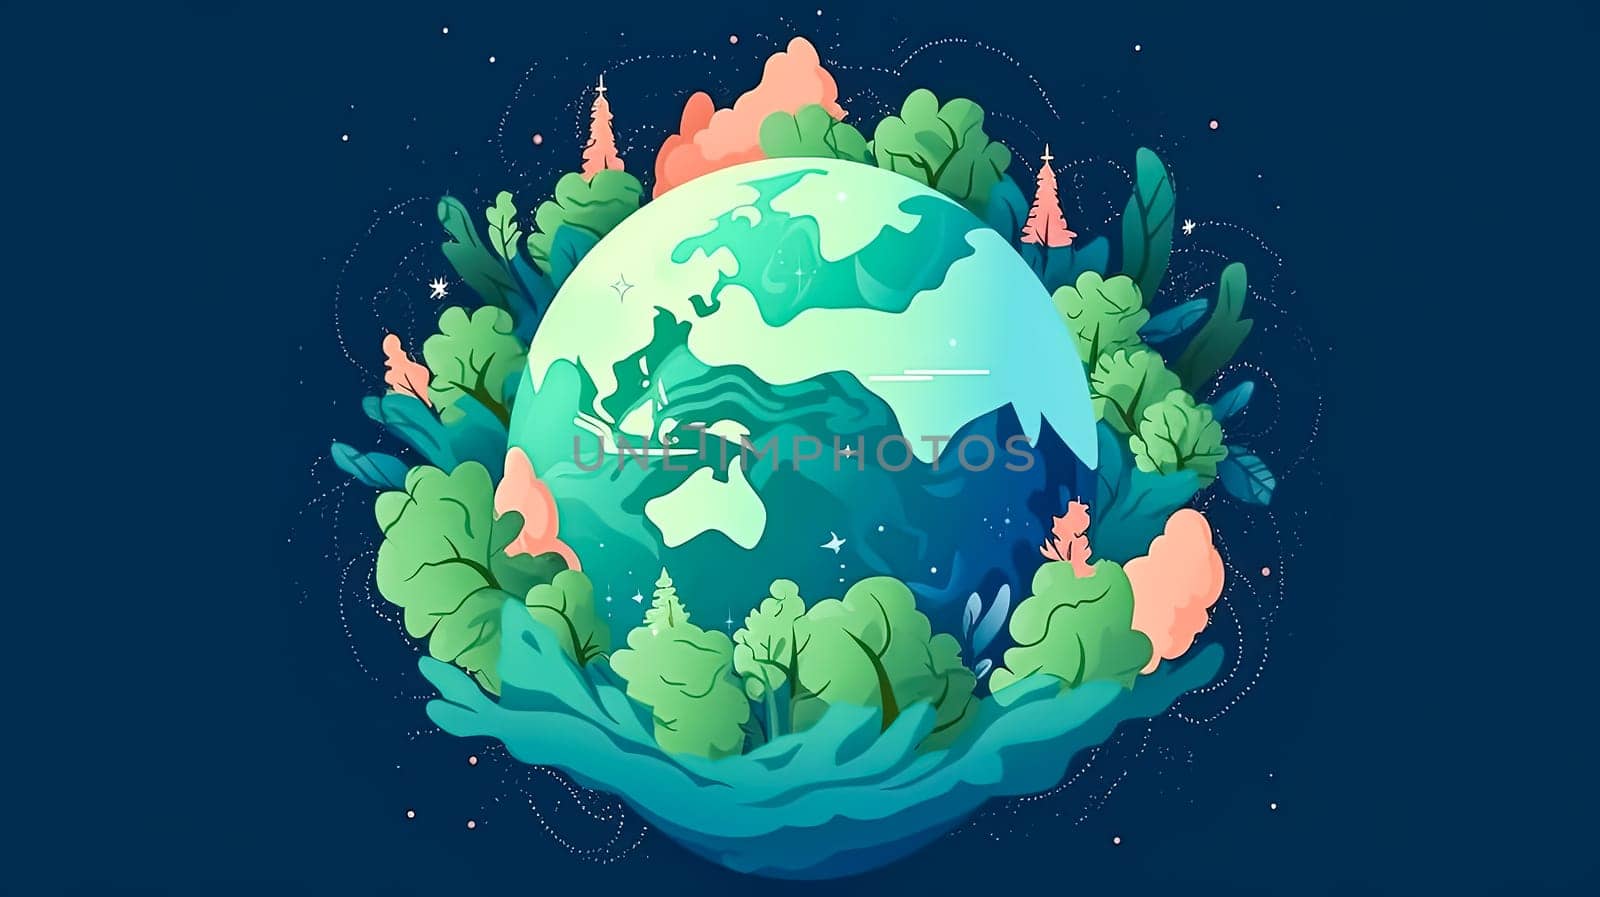 Global harmony, Earth covered in a blanket of green a joyous tribute to nature conservation and the collective spirit of Earth Day celebrations